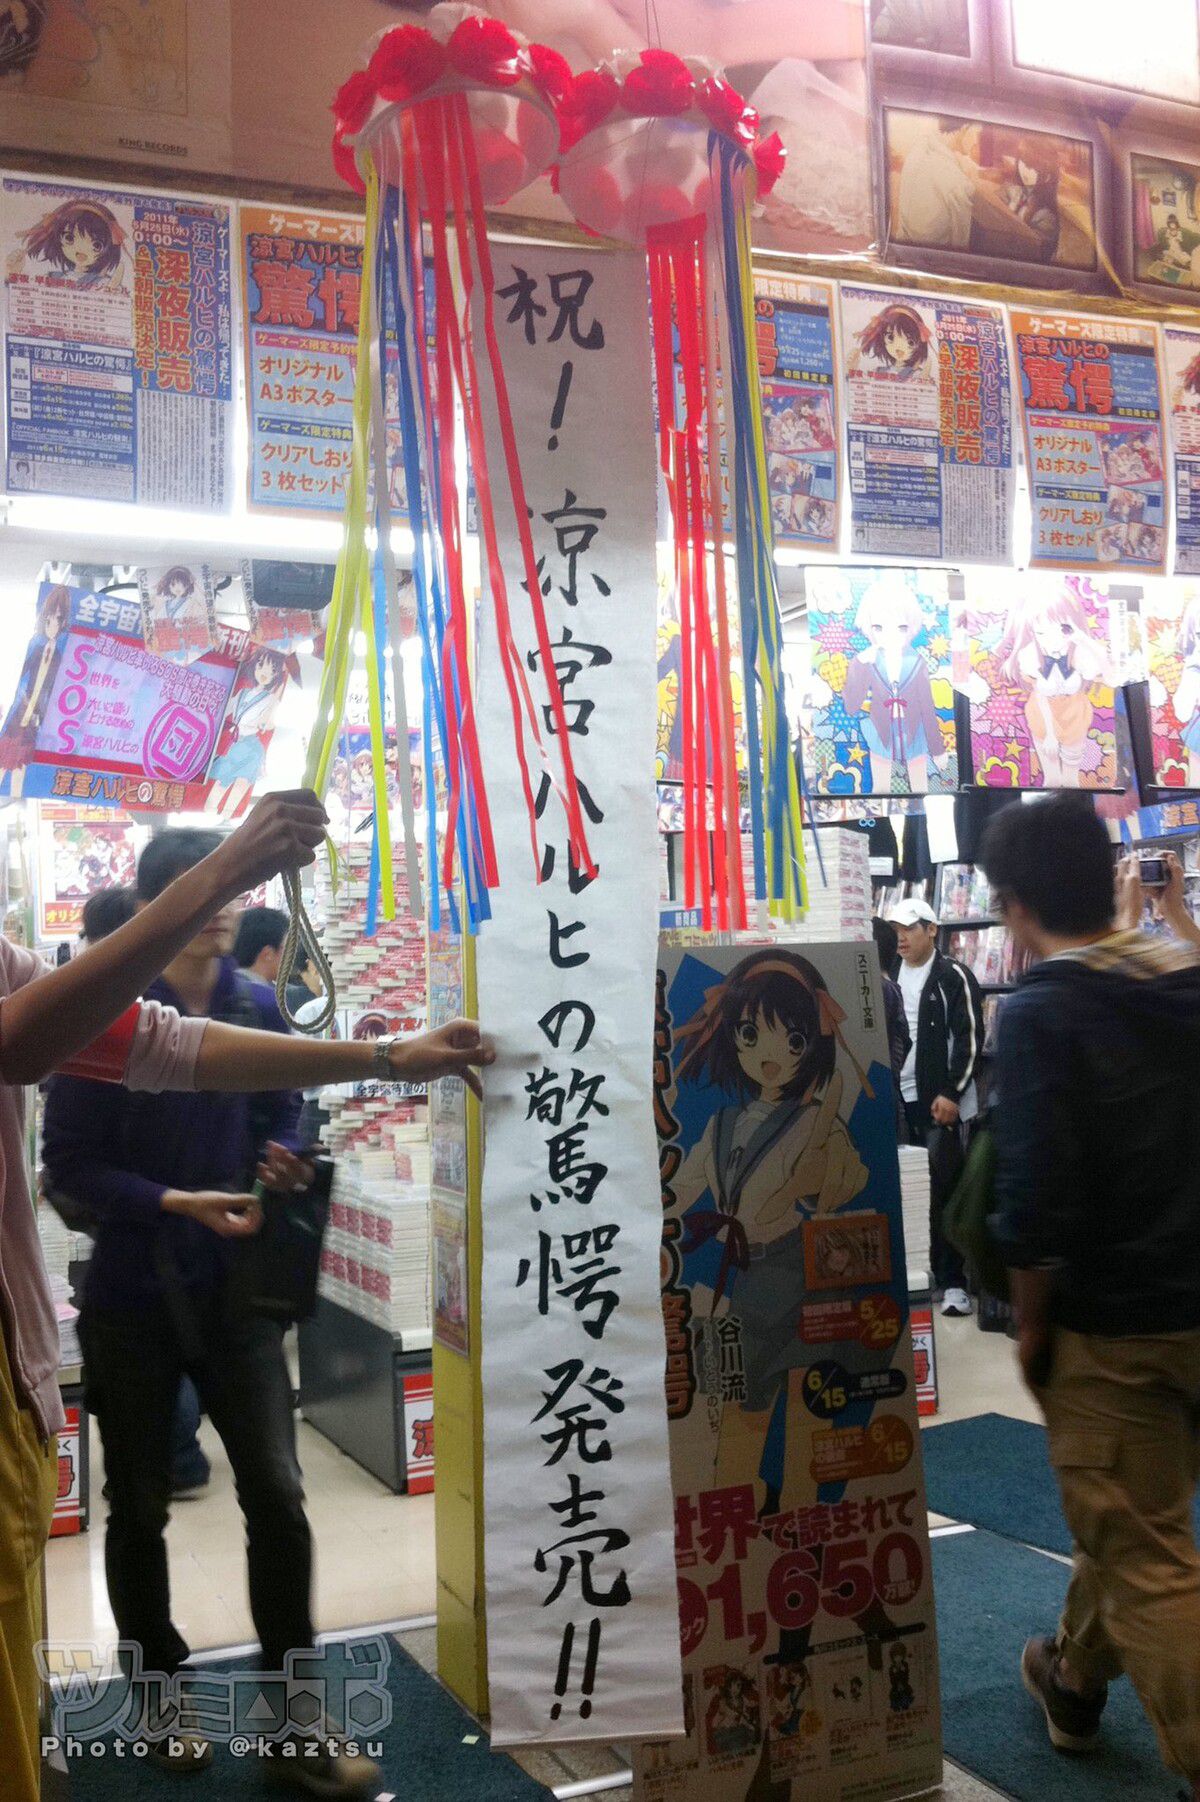 You can find photos of the heyday of the "Haruhi Ryomiya" boom. I'm not good at it. 1